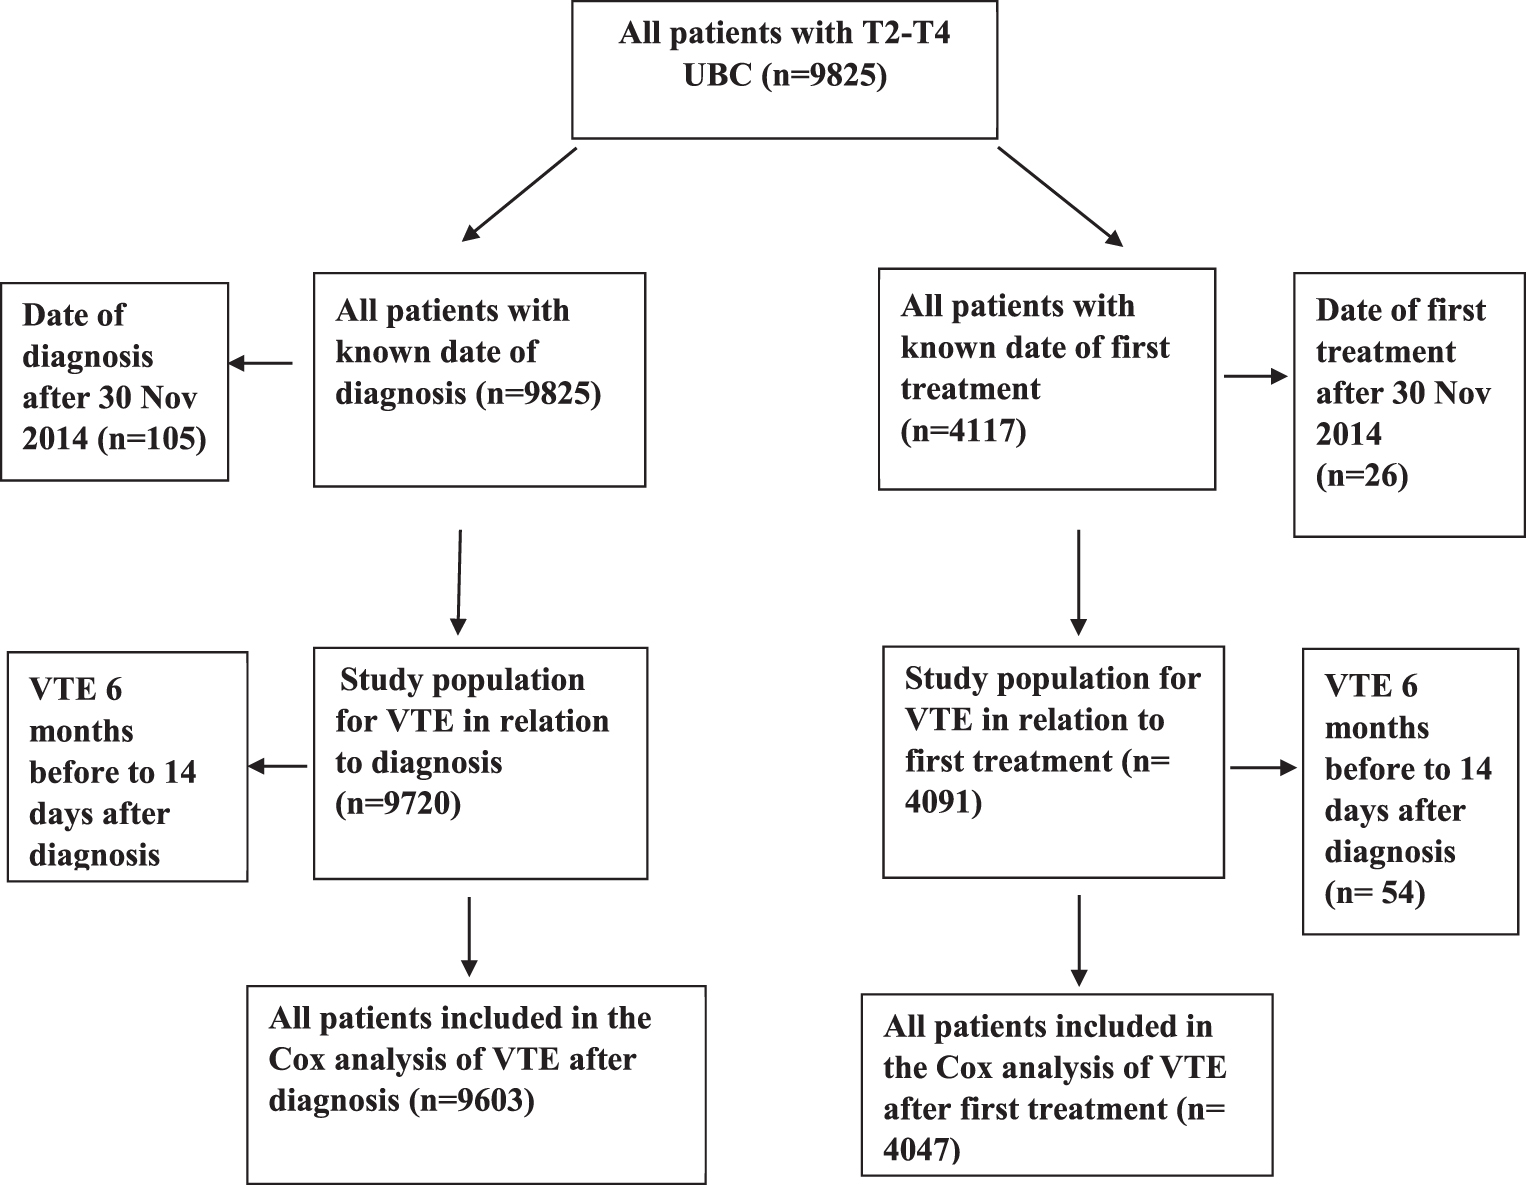 Diagram of studied groups of patients in those analysed for VTE after diagnosis and VTE after first treatment date, respectively, in all patients with stage T2-T4 urinary bladder cancer in Sweden 1997–2014.